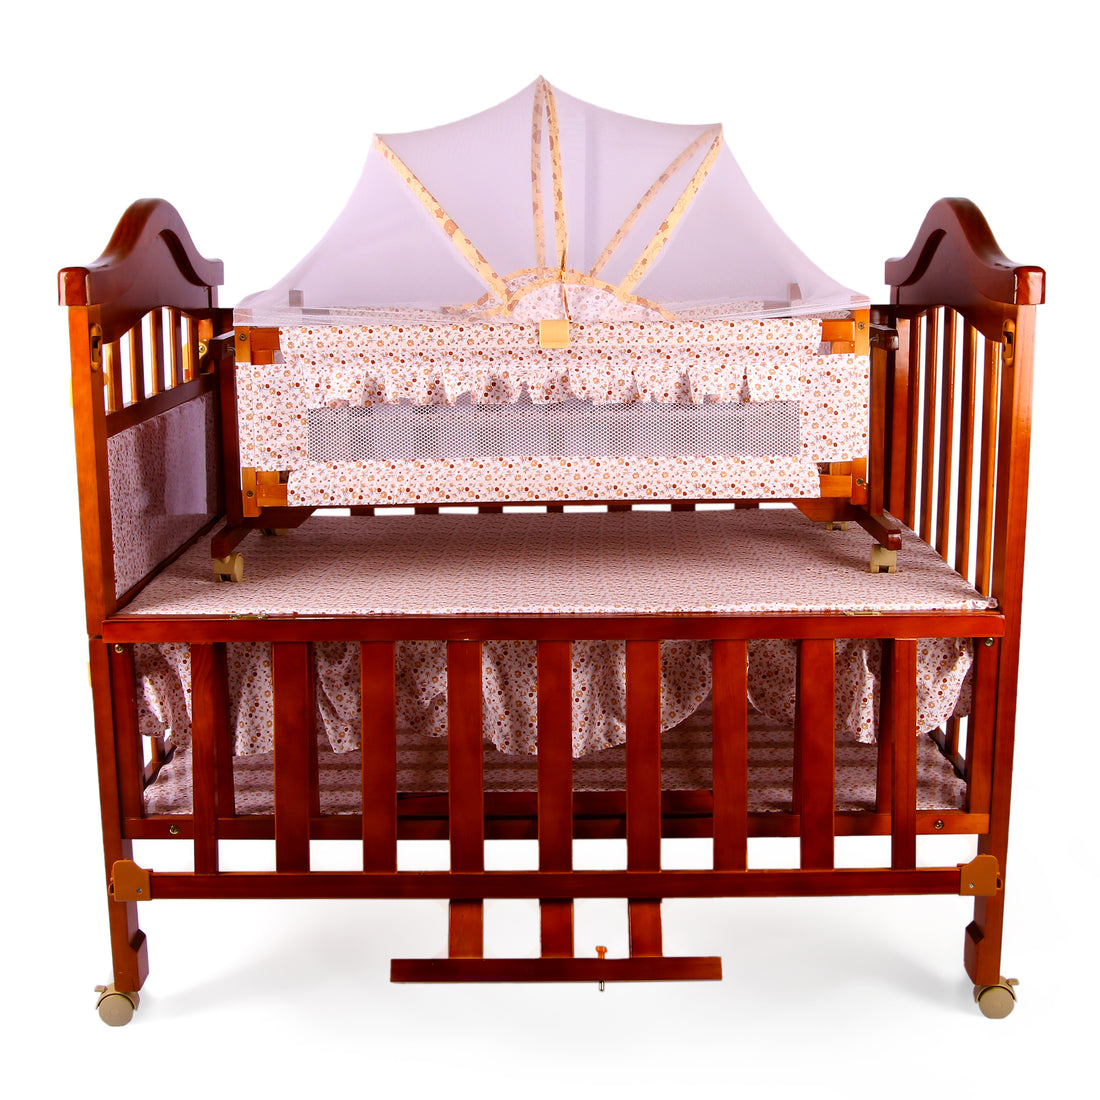 Versatile Junior Brown Baby Cot with Convertible Sides - Elegant Wood Craft for Newborn to Toddler